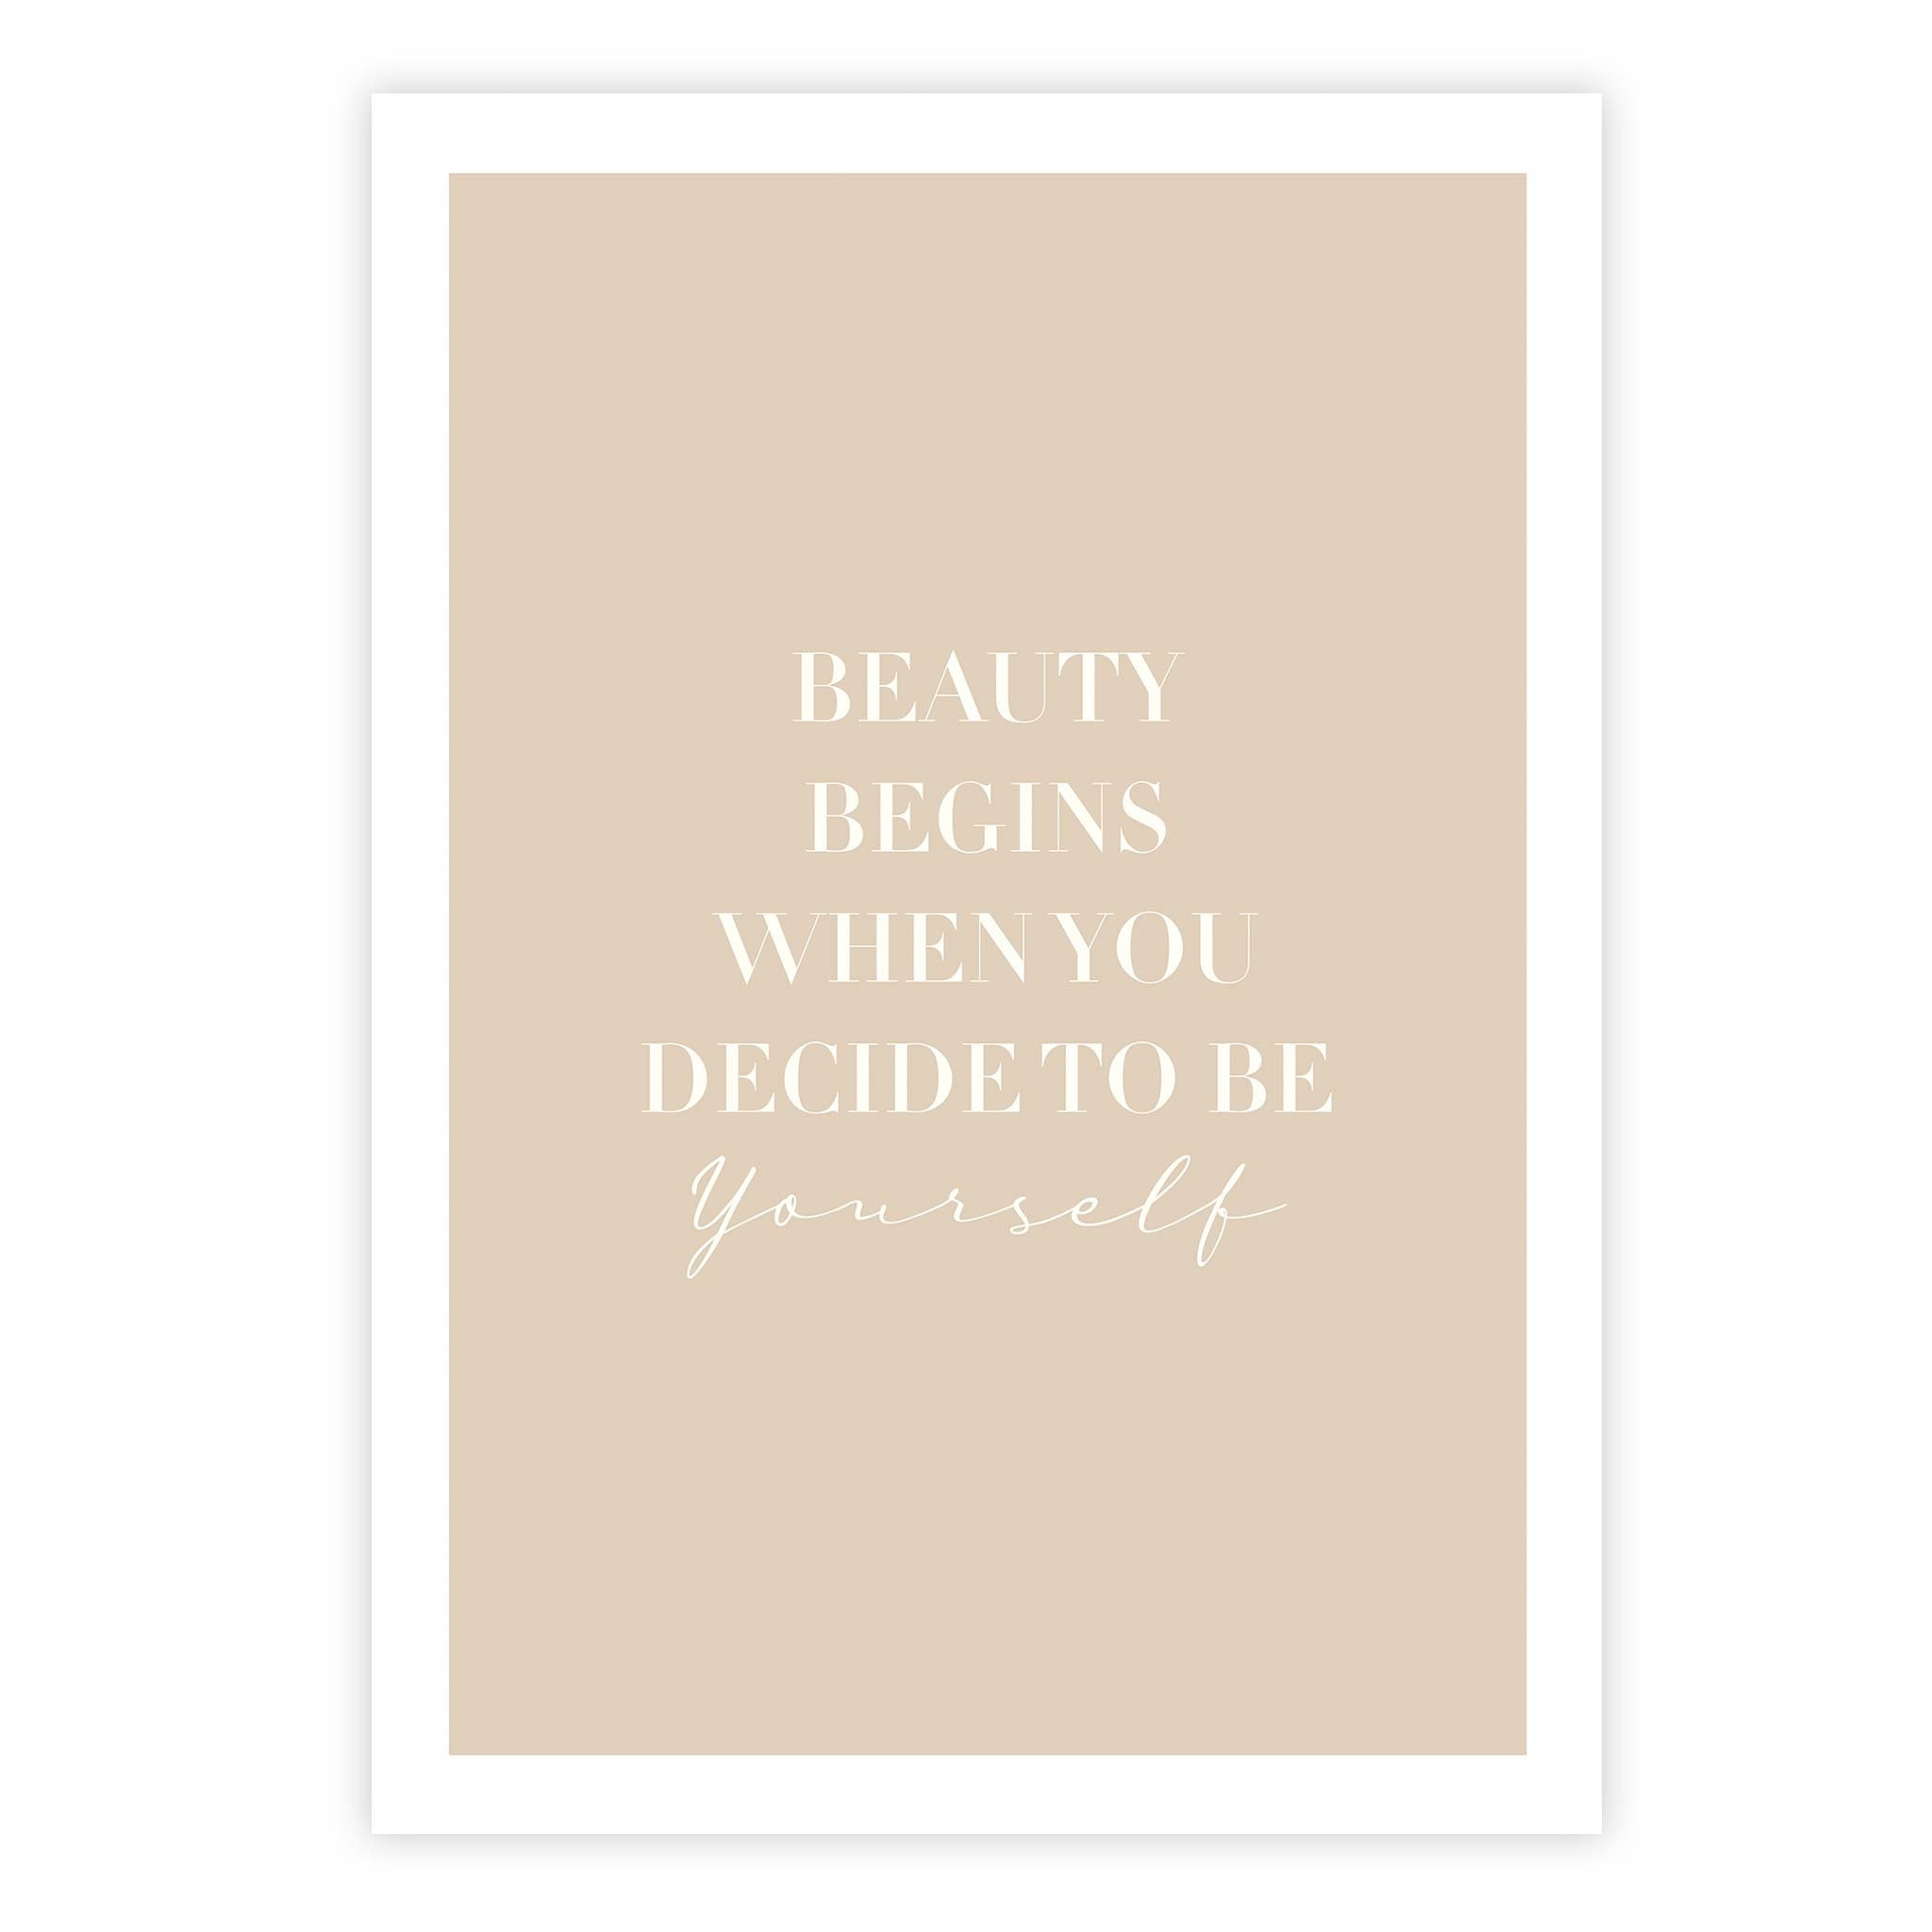 Second Life Marketplace - Coco Chanel Quote, Beauty Begins Poster